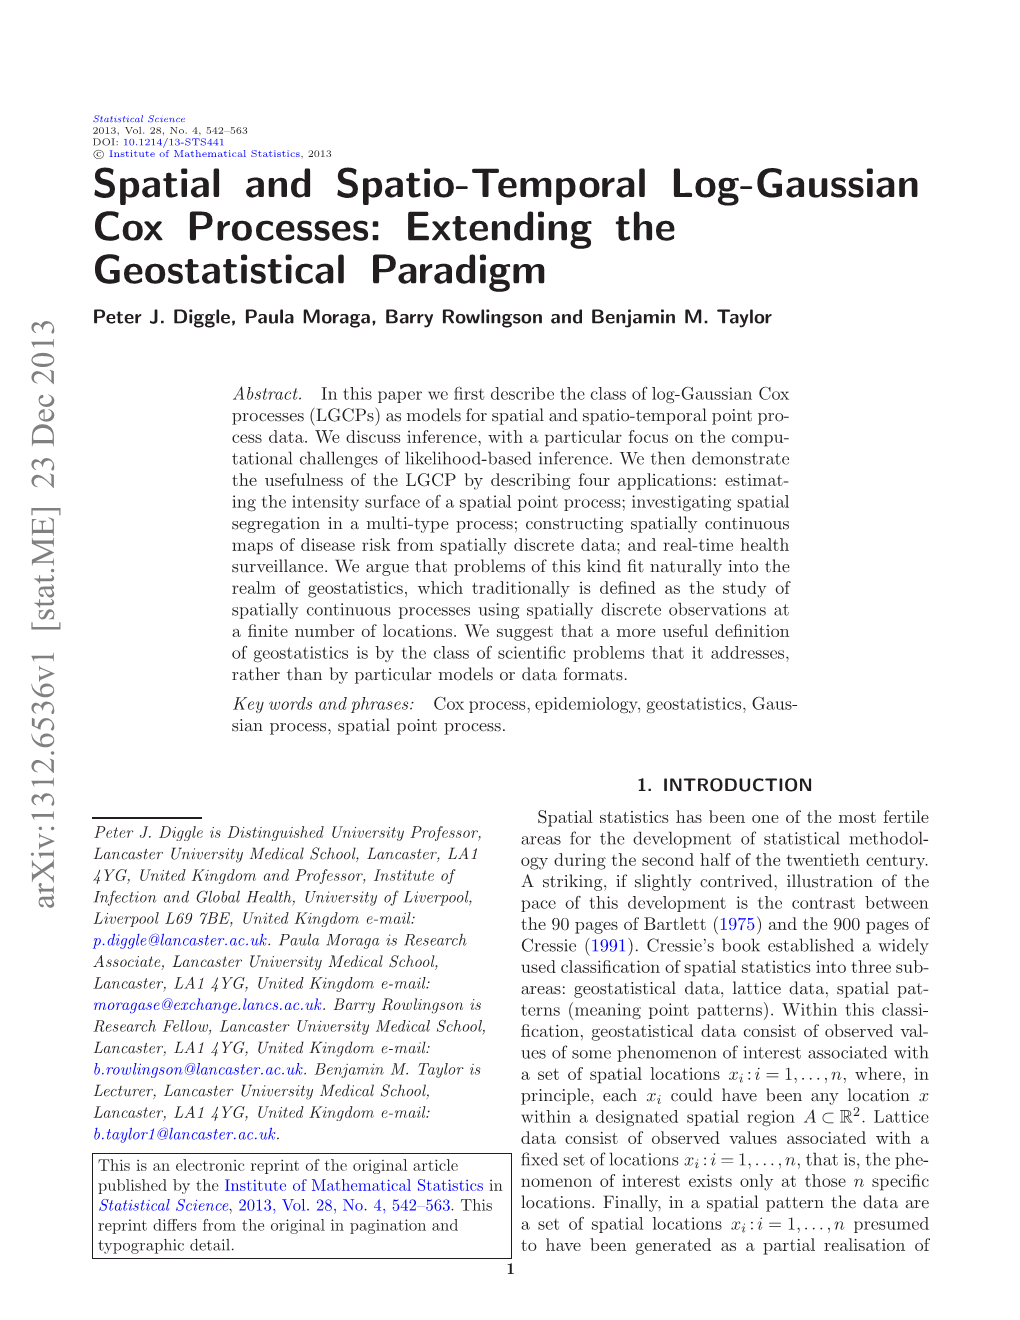 Spatial and Spatio-Temporal Log-Gaussian Cox Processes: Extending the Geostatistical Paradigm